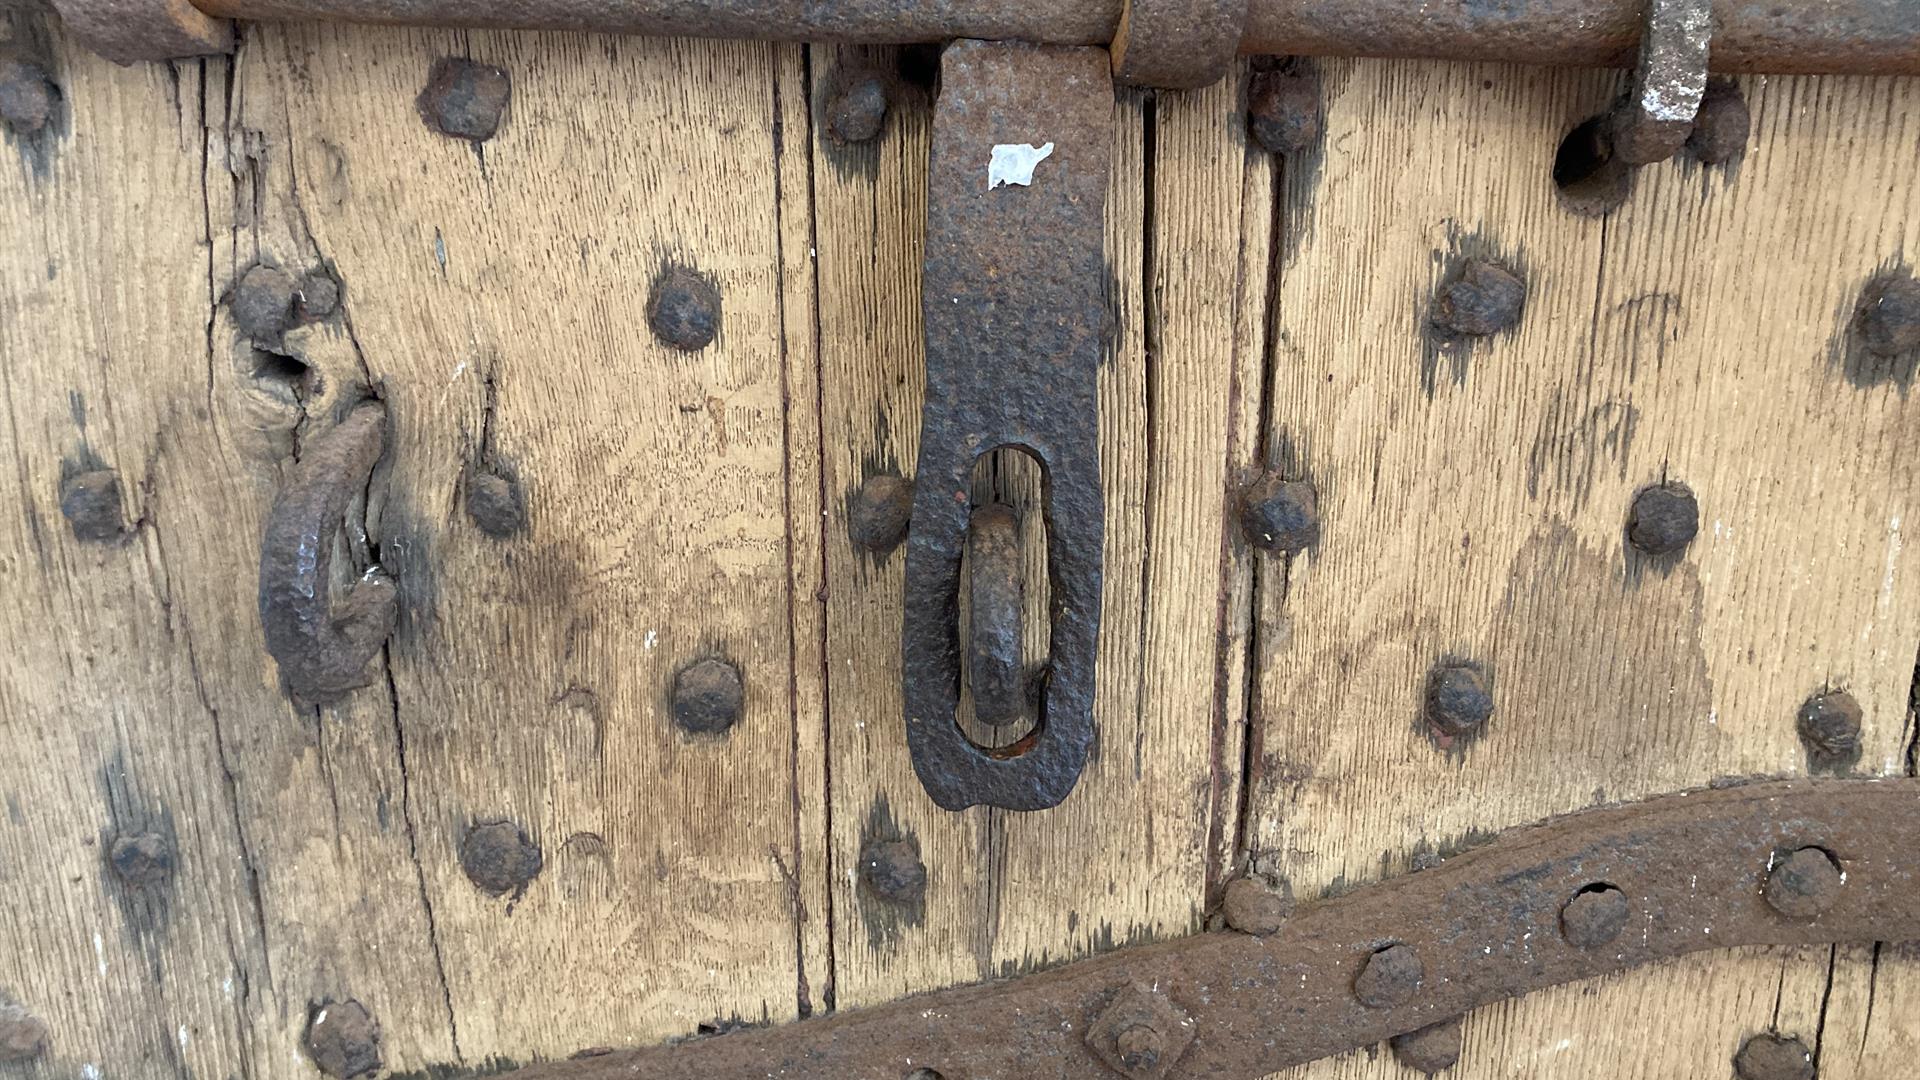 Section of a door from the olg gaol, now the Down County Museum. It features metal bars and reinforcing nails  to strengthen it.